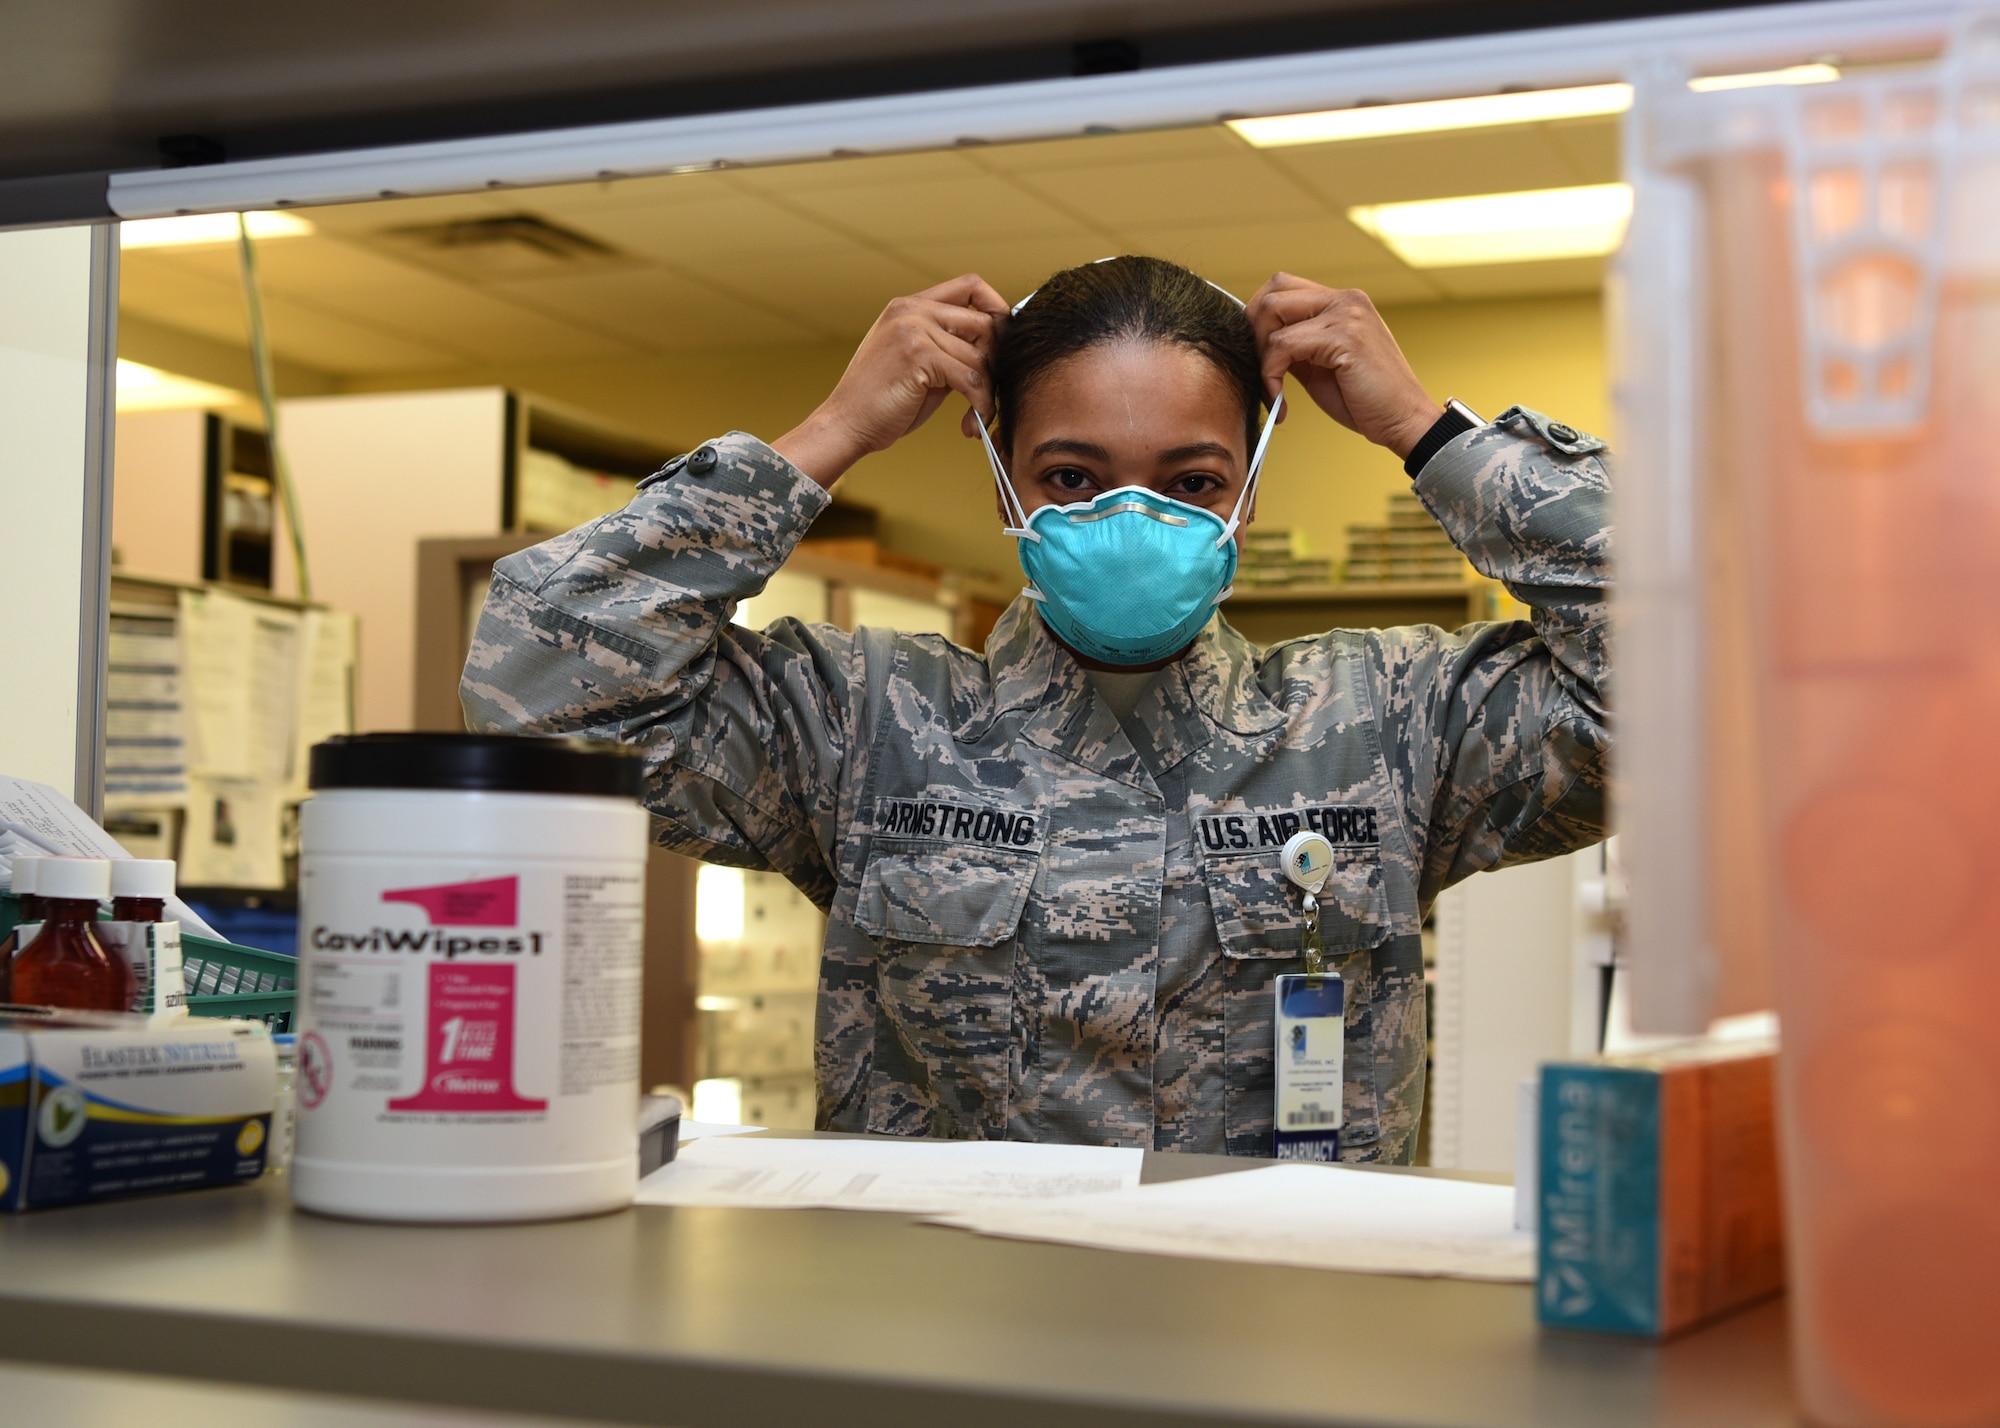 U.S. Air Force Staff Sgt. Montea Armstrong, 17th Medical Group pharmacy technician, applies proper protective gear for heightened exposure risks with customer interactions at the Ross Clinic’s pharmacy on Goodfellow Air Force Base, Texas, March 23, 2020. With Goodfellow’s Health Protection Condition in BRAVO, Armstrong wore a mask to avoid contamination of COVID-19. Goodfellow currently has no confirmed COVID-19 cases.  (U.S. Air Force Photo by Airman 1st Class Abbey Rieves)